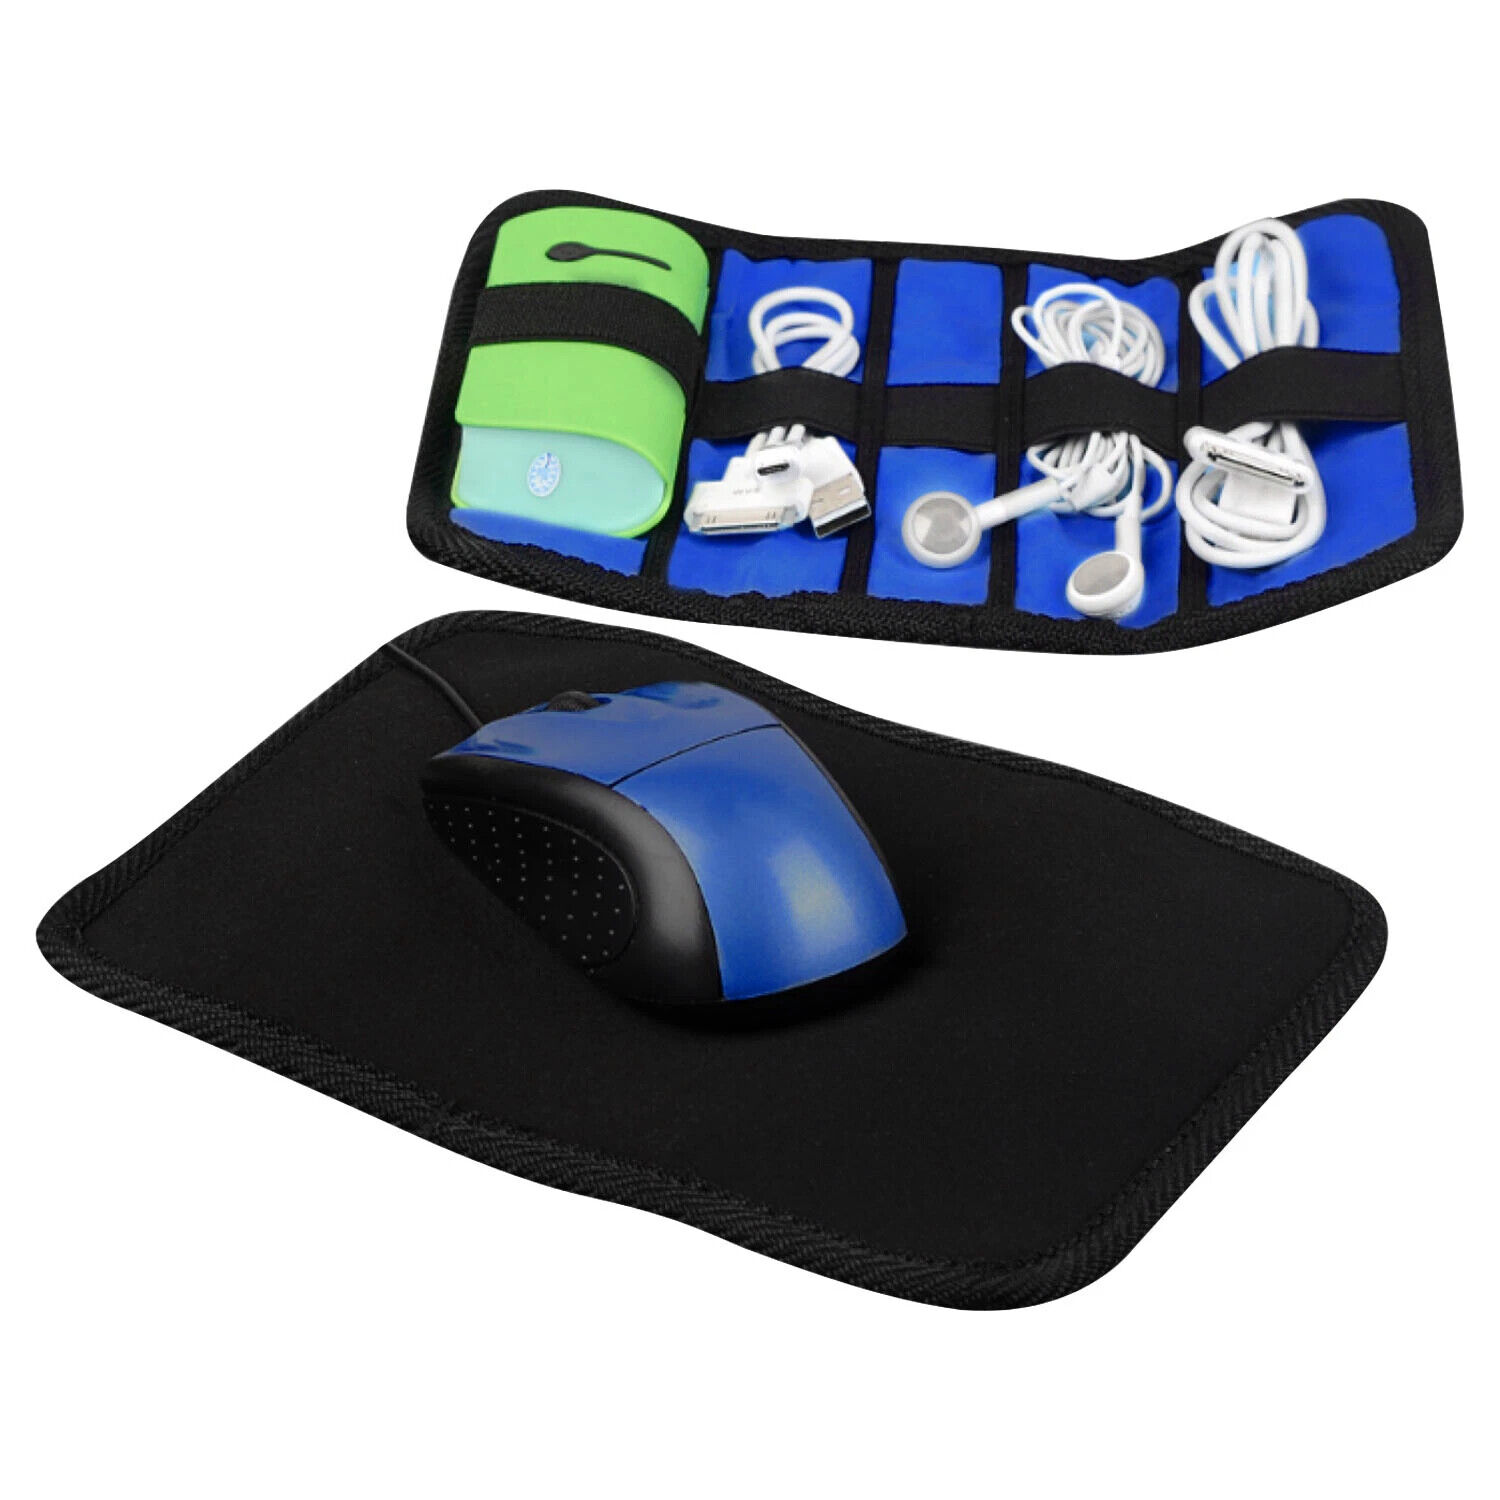 Portable Mouse Pad Case Combo